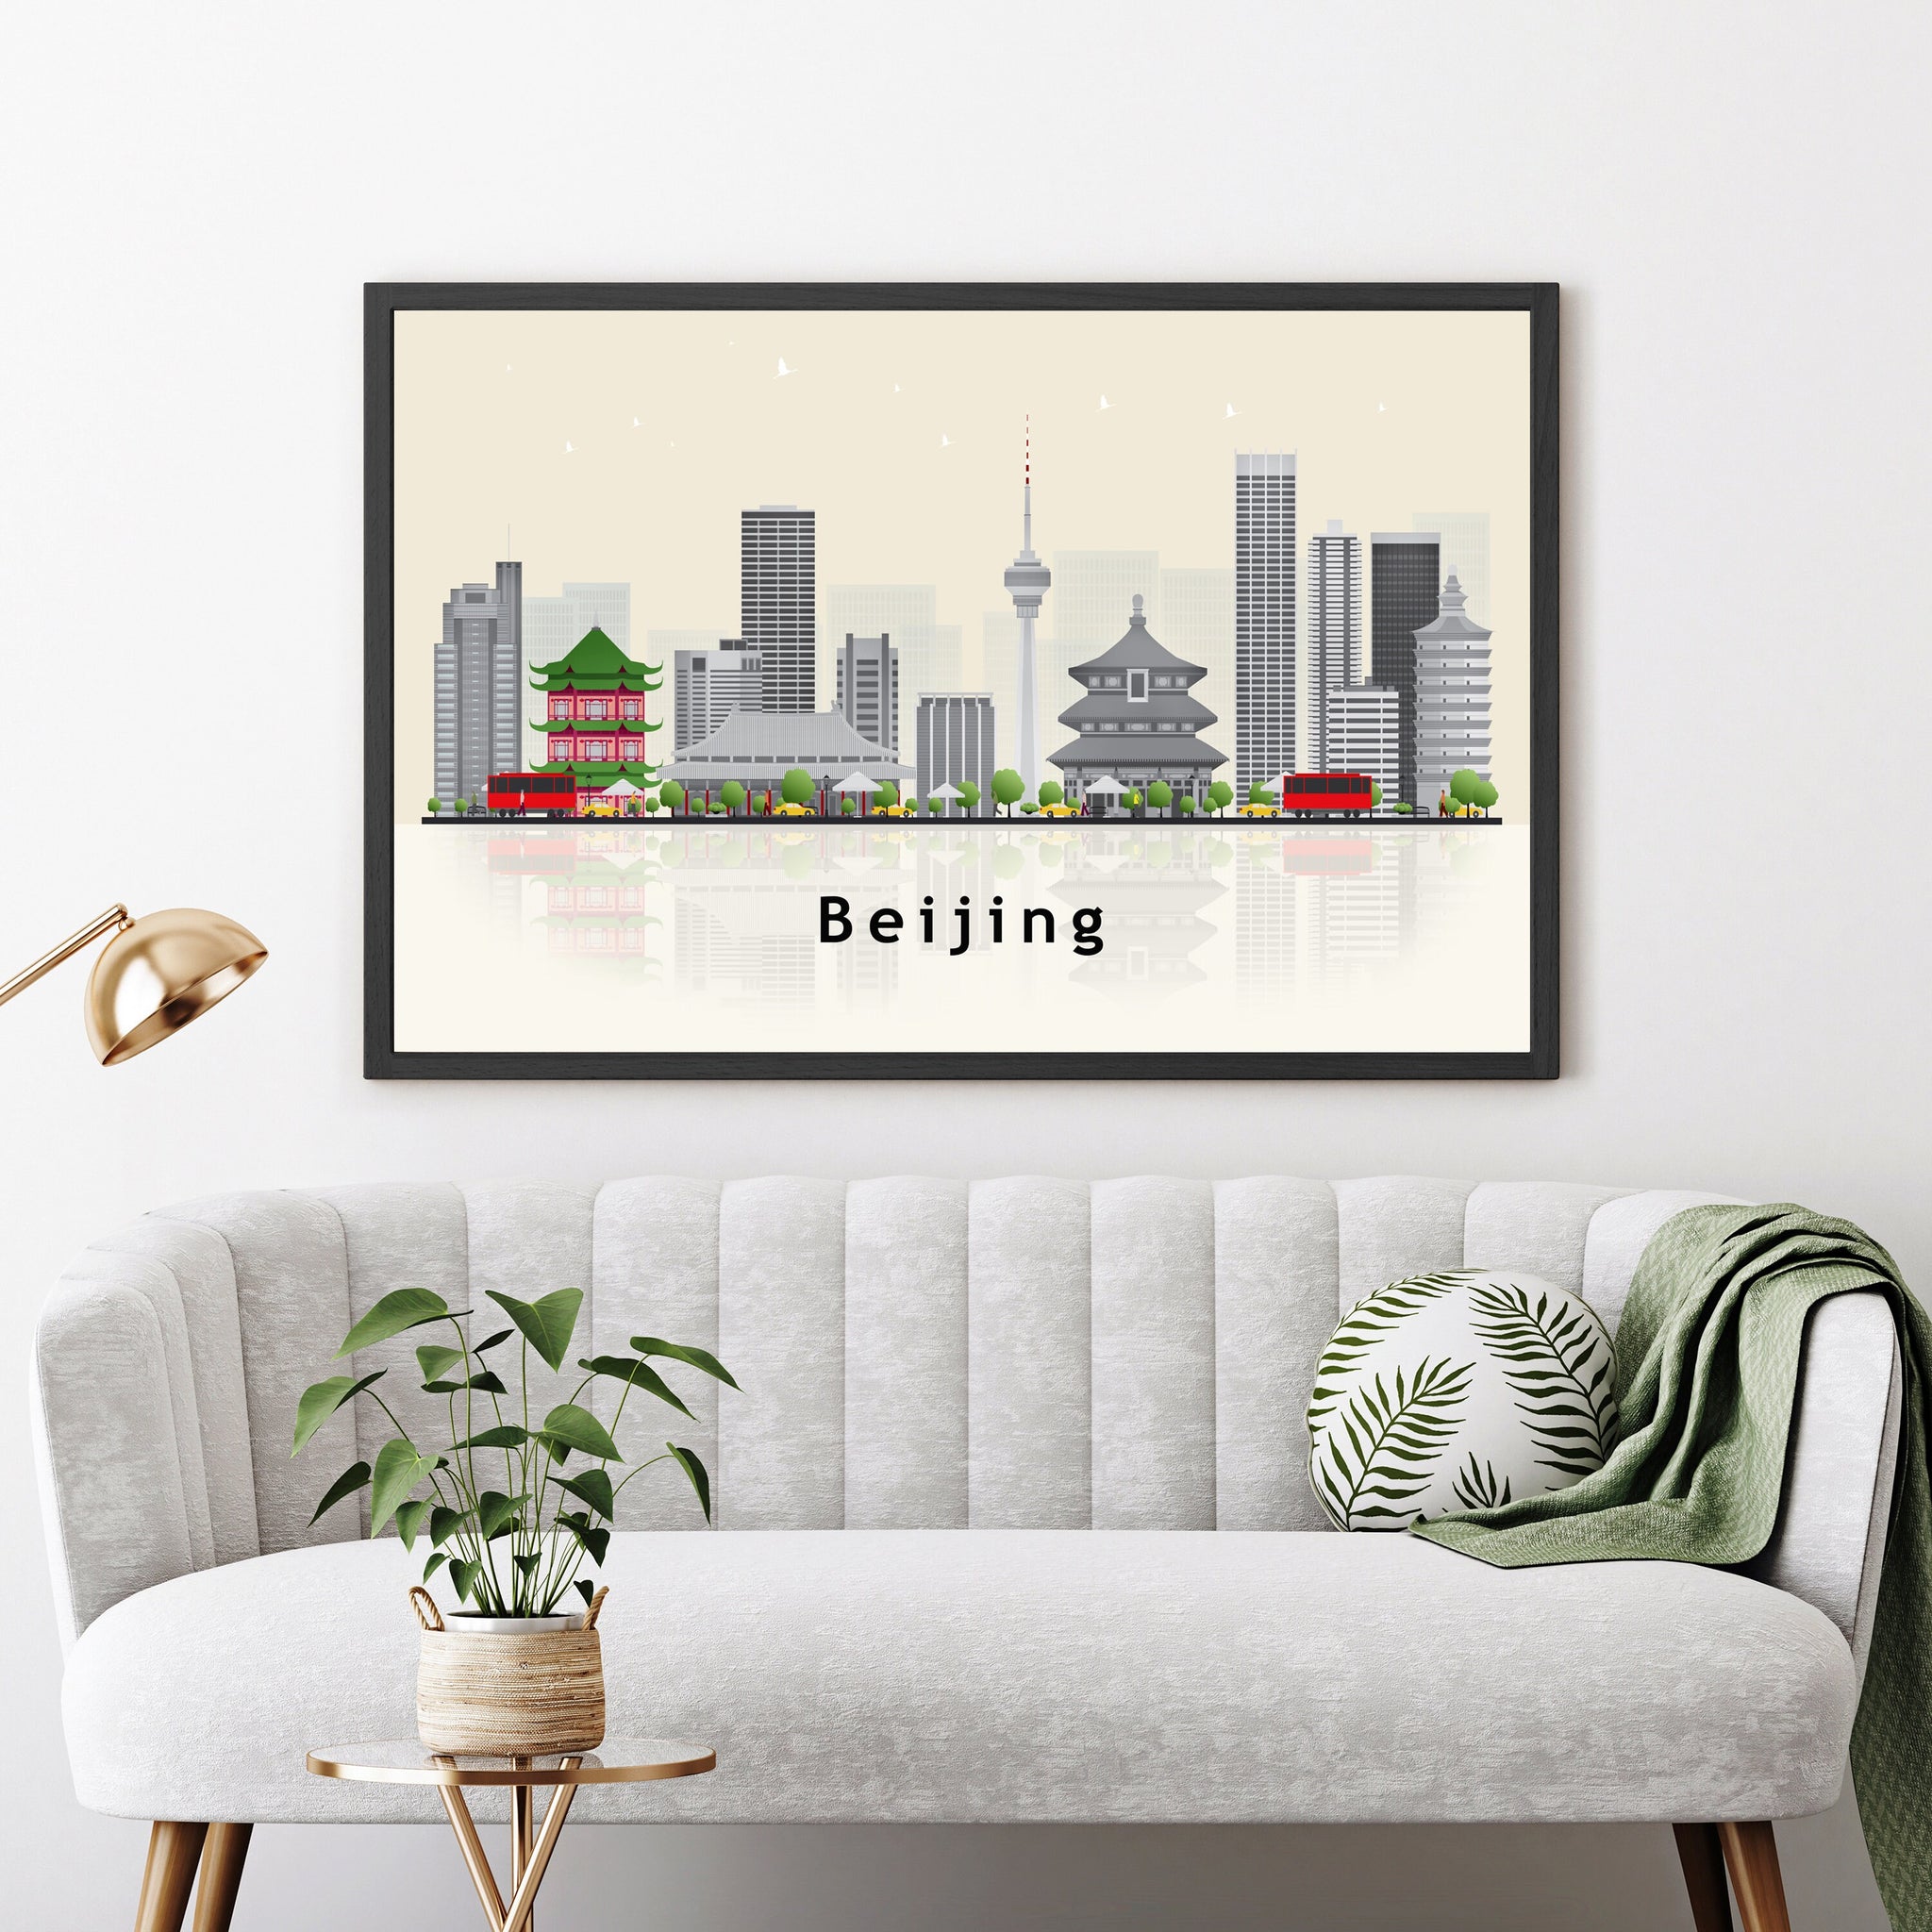 BEIJING CHINA Illustration skyline poster, Modern skyline cityscape poster, China city skyline landmark map poster, Home wall decoration